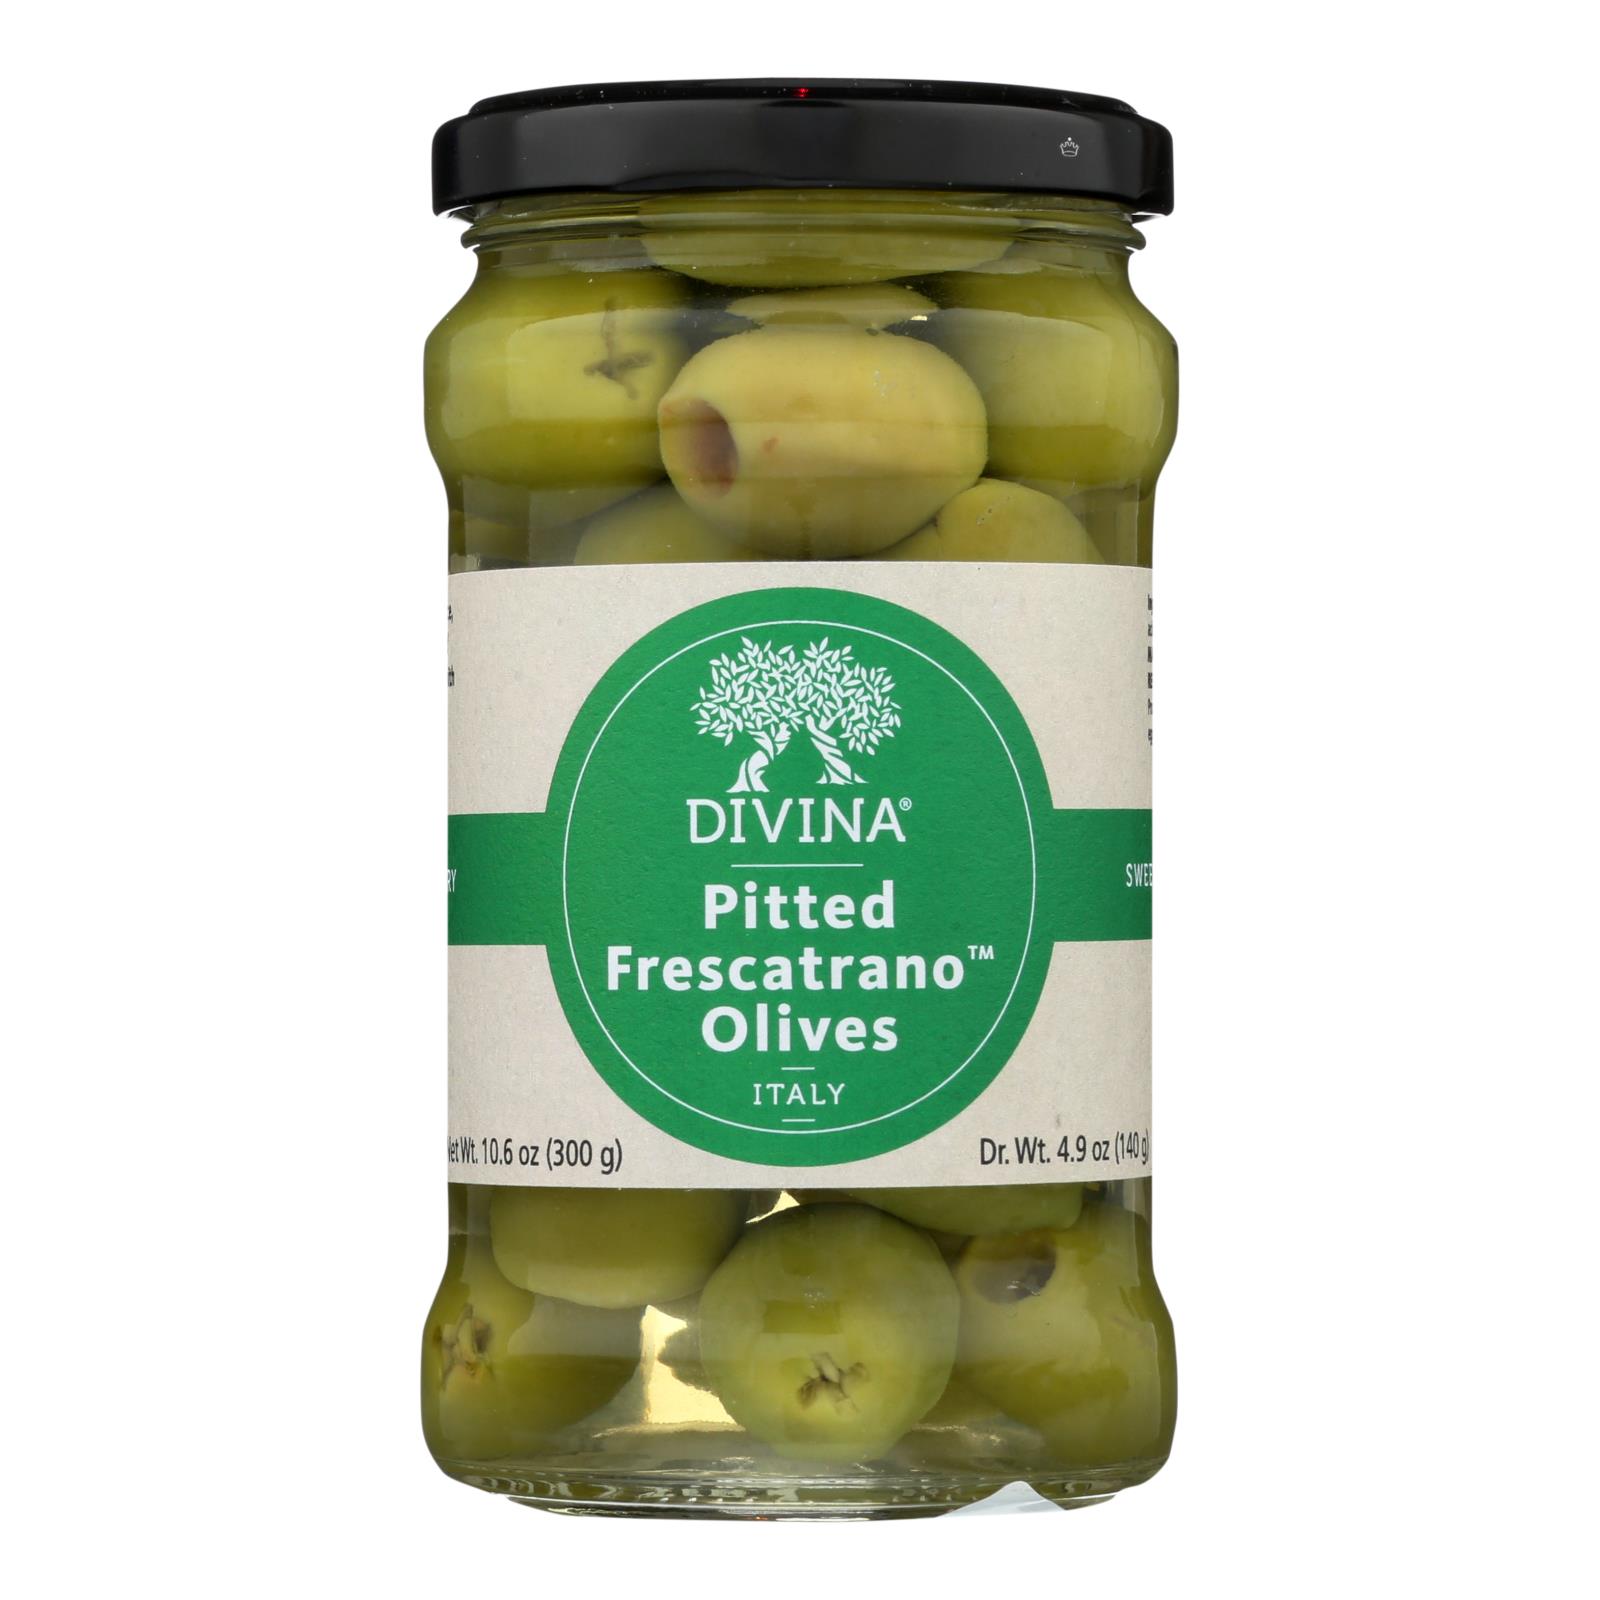 Divina - Olives Pitted Frescatrano - 6개 묶음상품 - 4.9 OZ